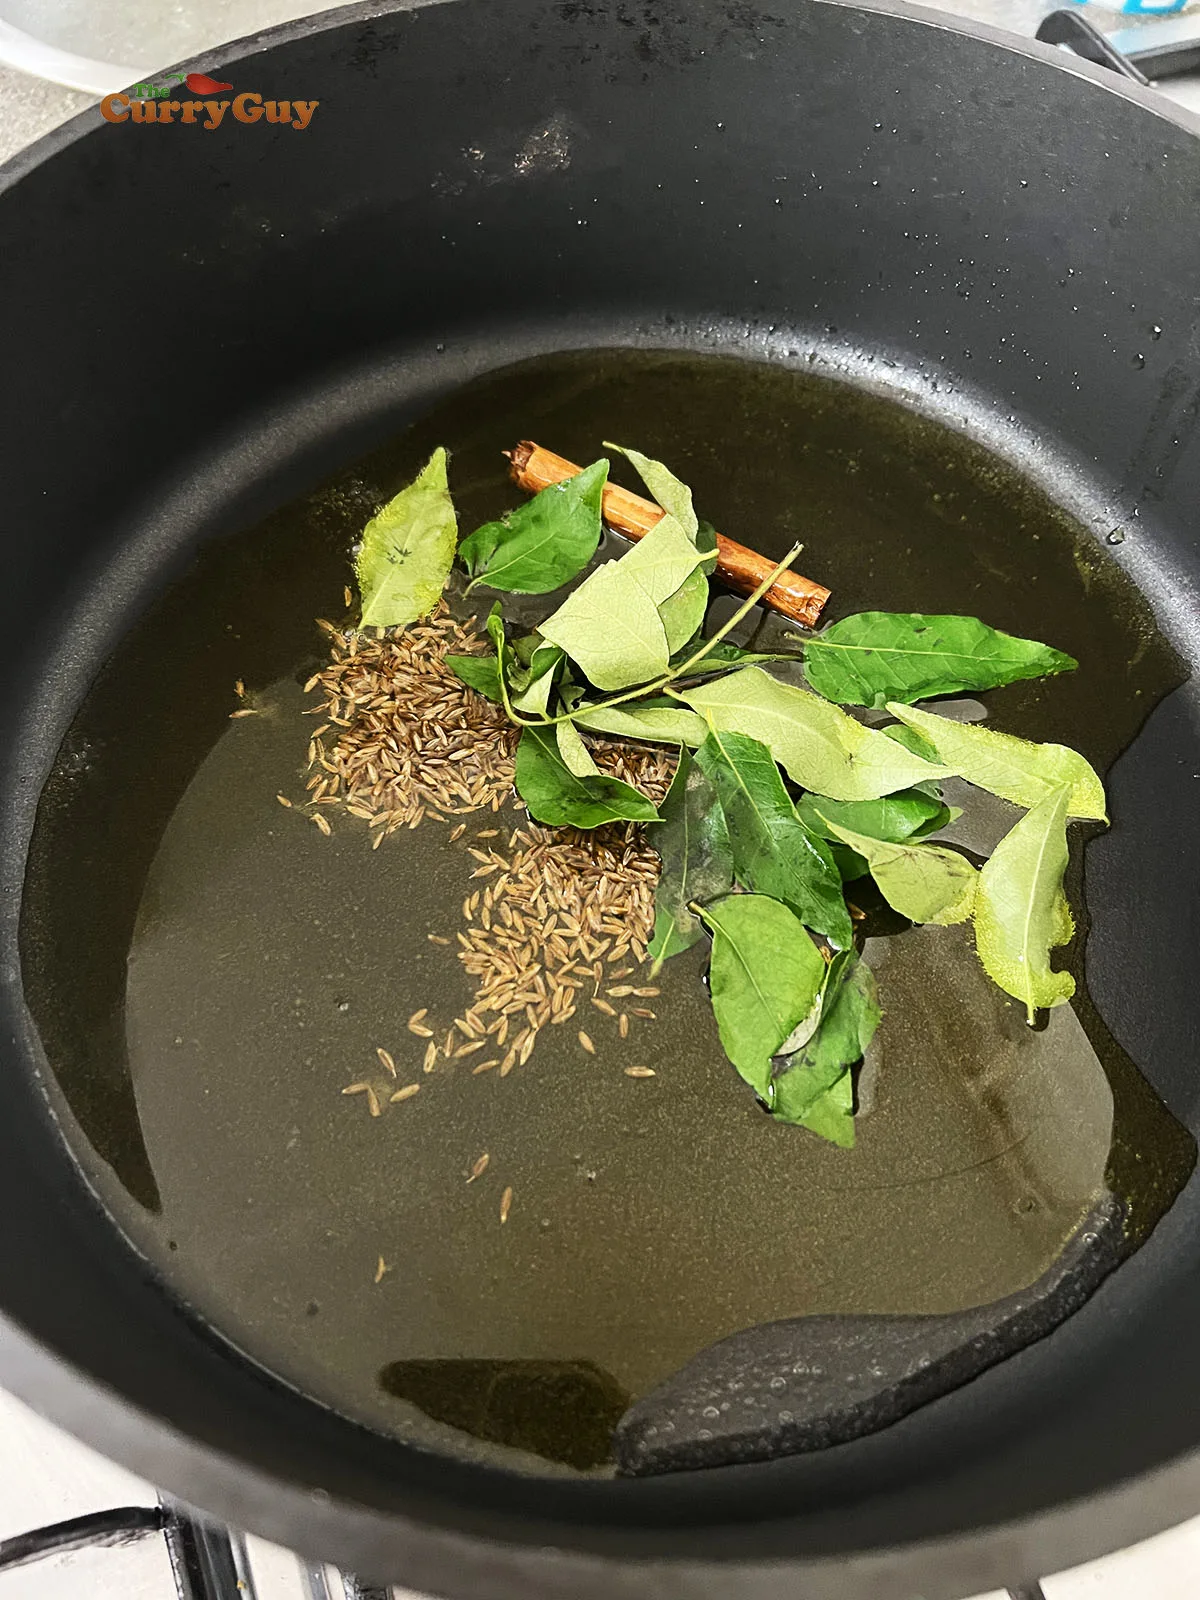 Infusing the curry leaves, cumin seeds and cinnamon stick in the hot ghee